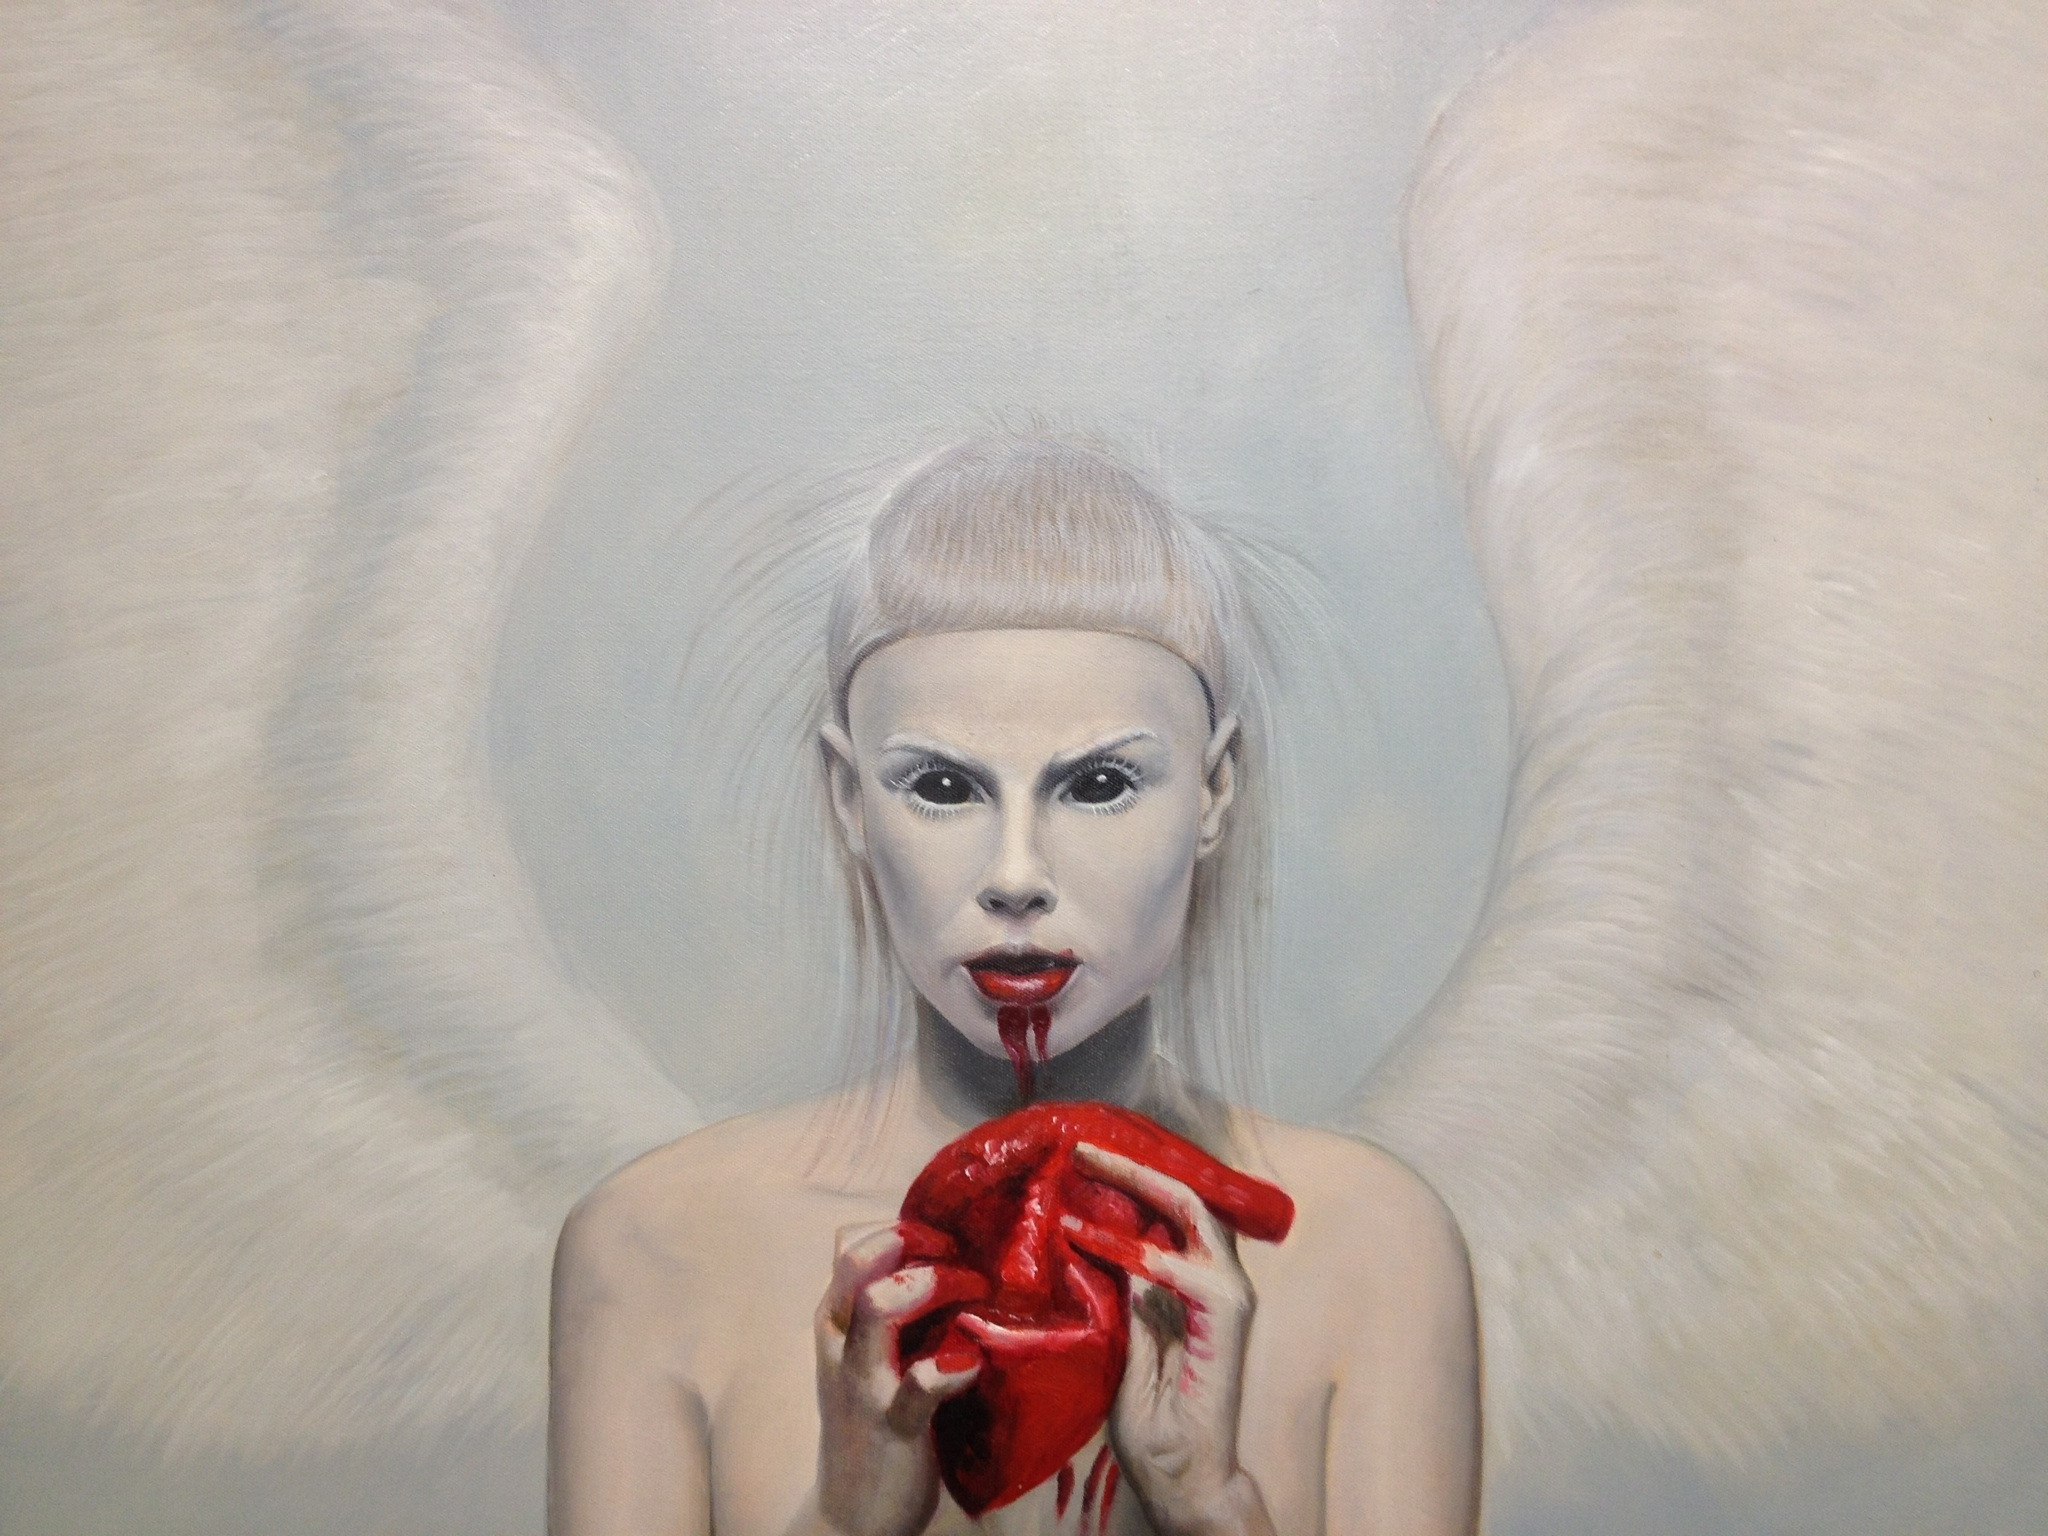 2048x1536 My oil painting of Yolandi Visser of Die Antwoord. (should I x/post to  r/wtf? Haha) critiques welcome.